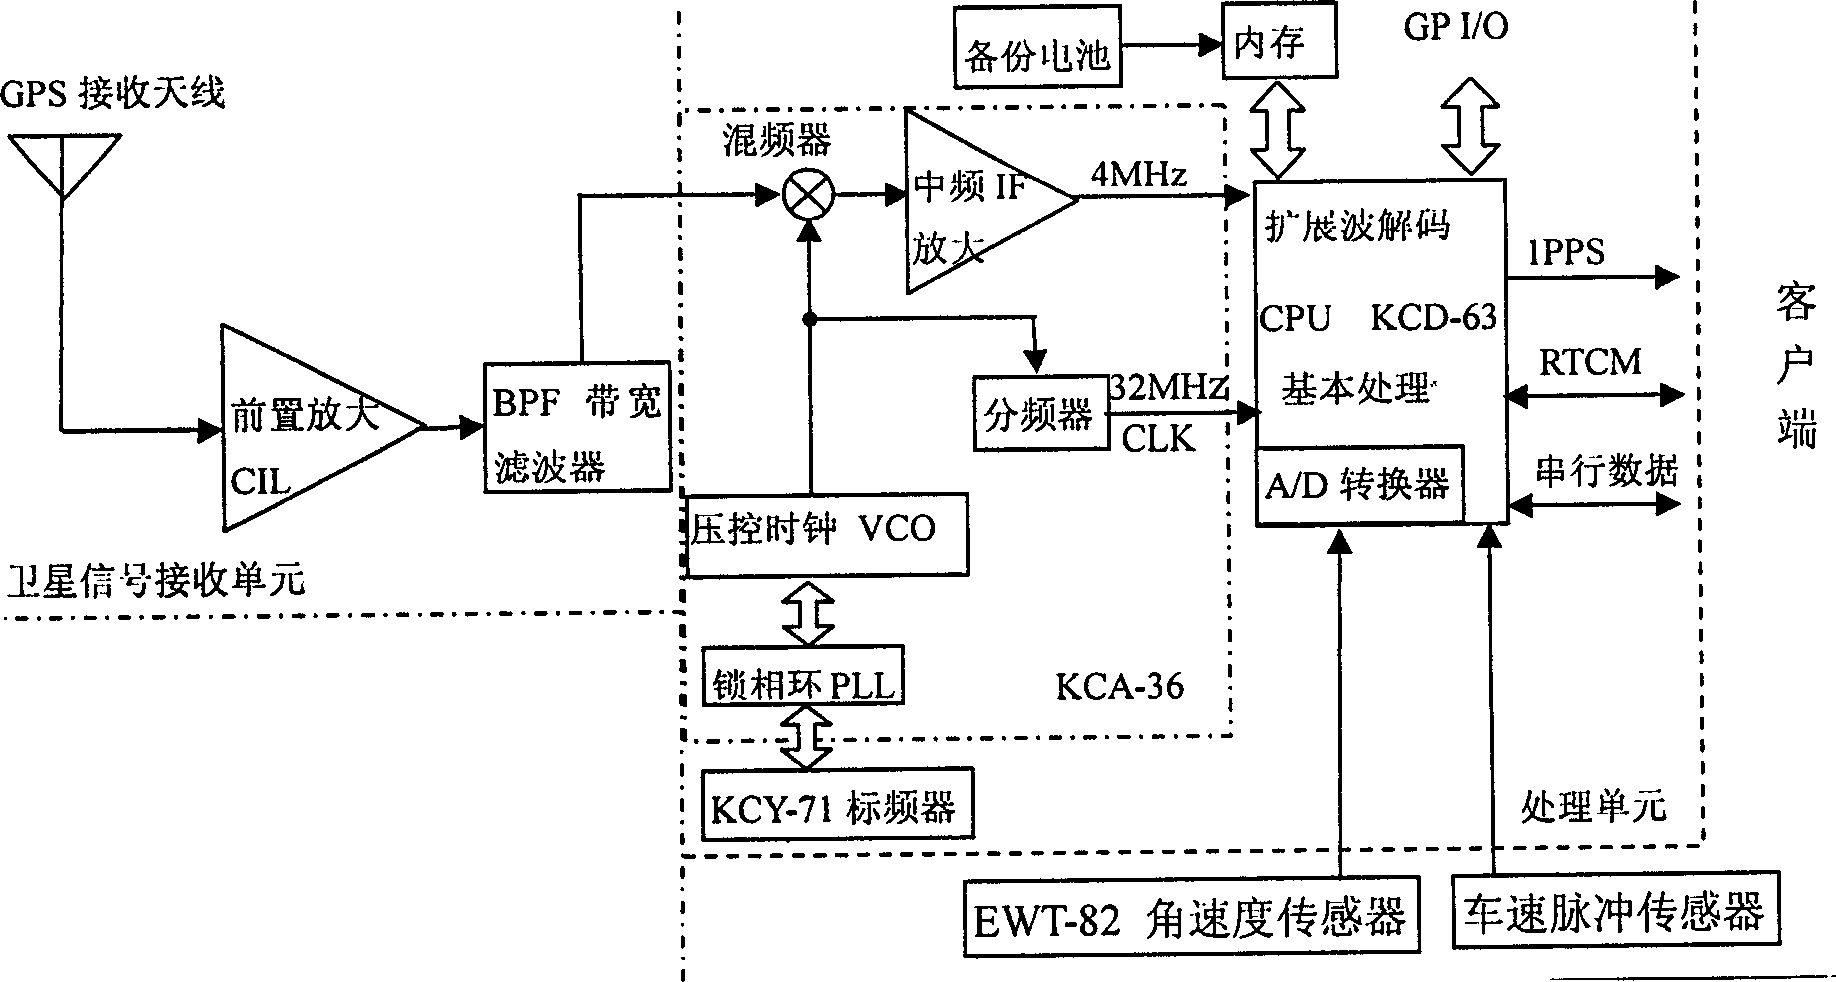 Self-contained assistant navigation and position method of a GPS receiving device